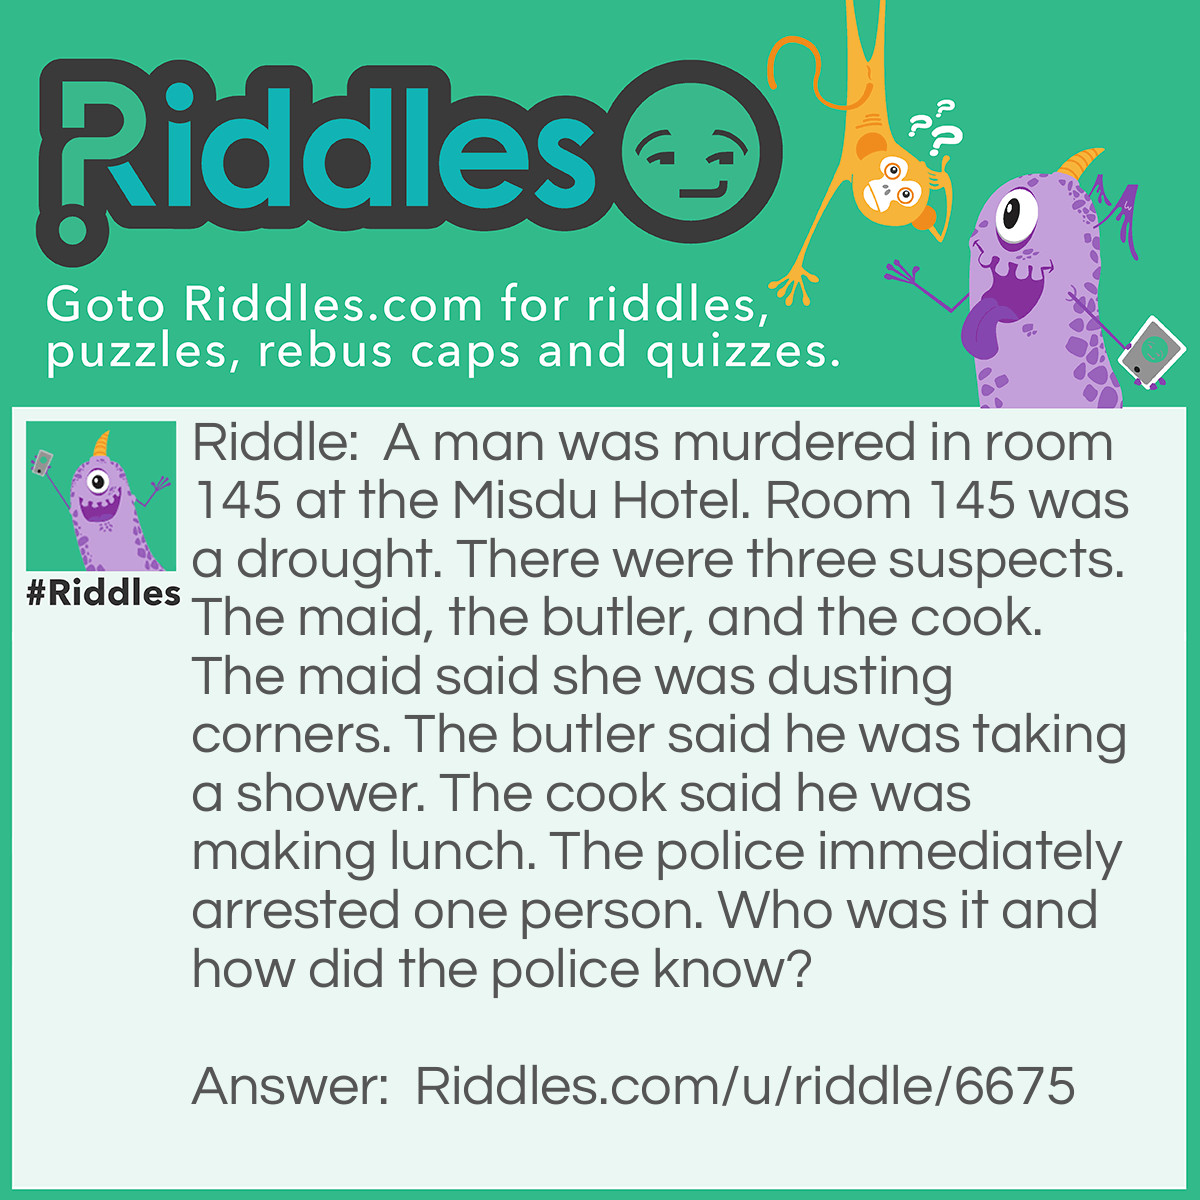 Riddle: A man was murdered in room 145 at the Misdu Hotel. Room 145 was a drought. There were three suspects. The maid, the butler, and the cook. The maid said she was dusting corners. The butler said he was taking a shower. The cook said he was making lunch. The police immediately arrested one person. Who was it and how did the police know? Answer: The butler did it because the room is a drought. Without water you can’t take a shower.